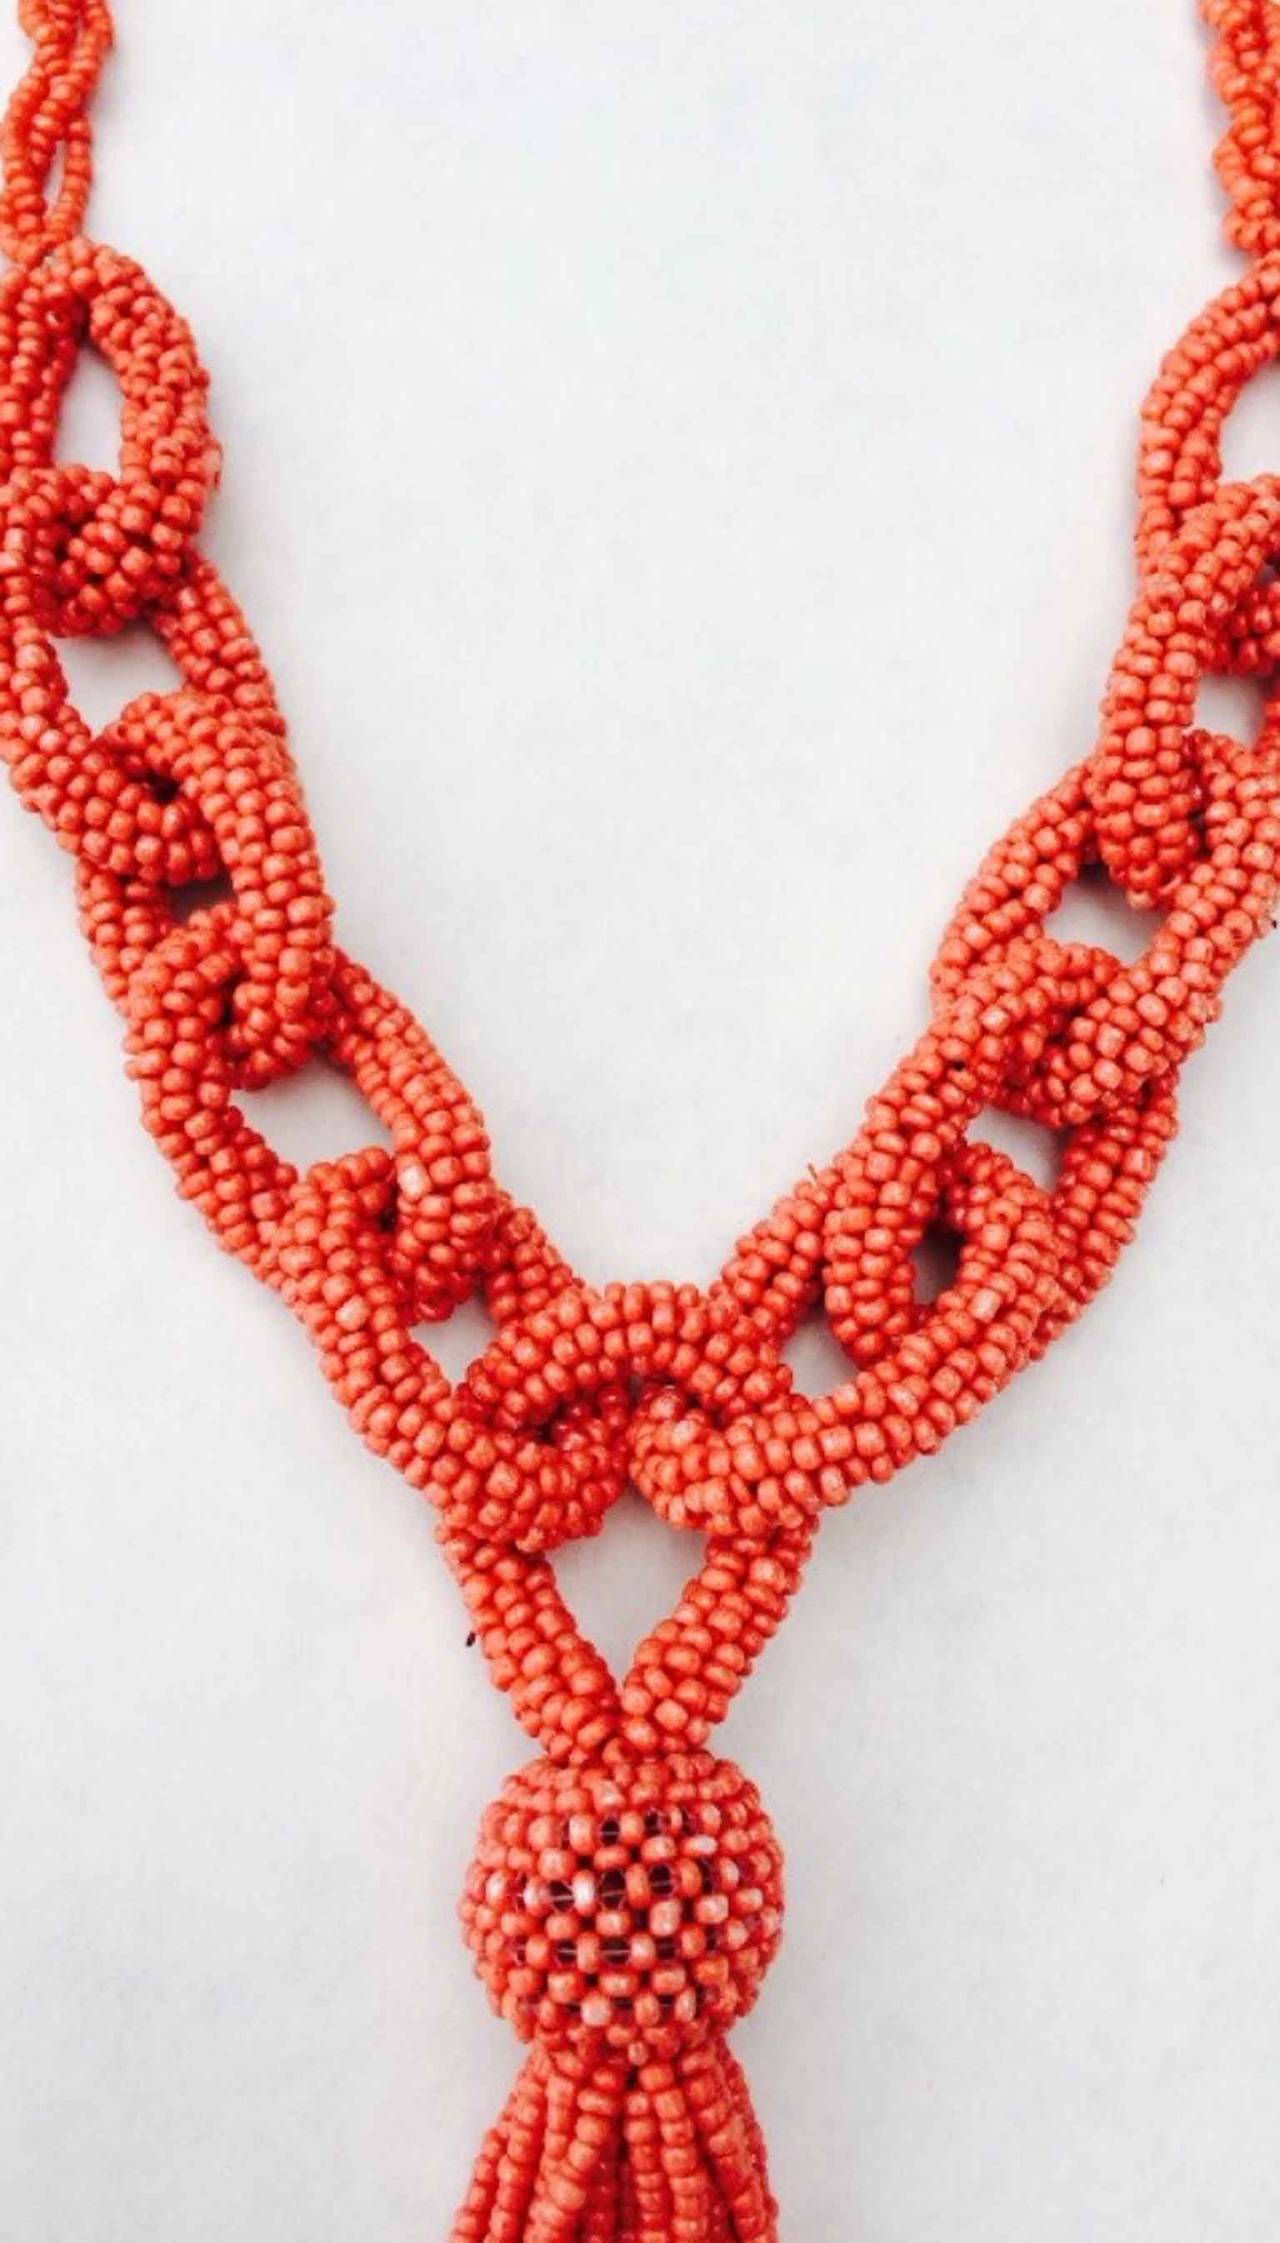 A exquisite and rare Mediterranean coral bead sautoir necklace. Authentic natural coral hand knotted item features fully beaded 